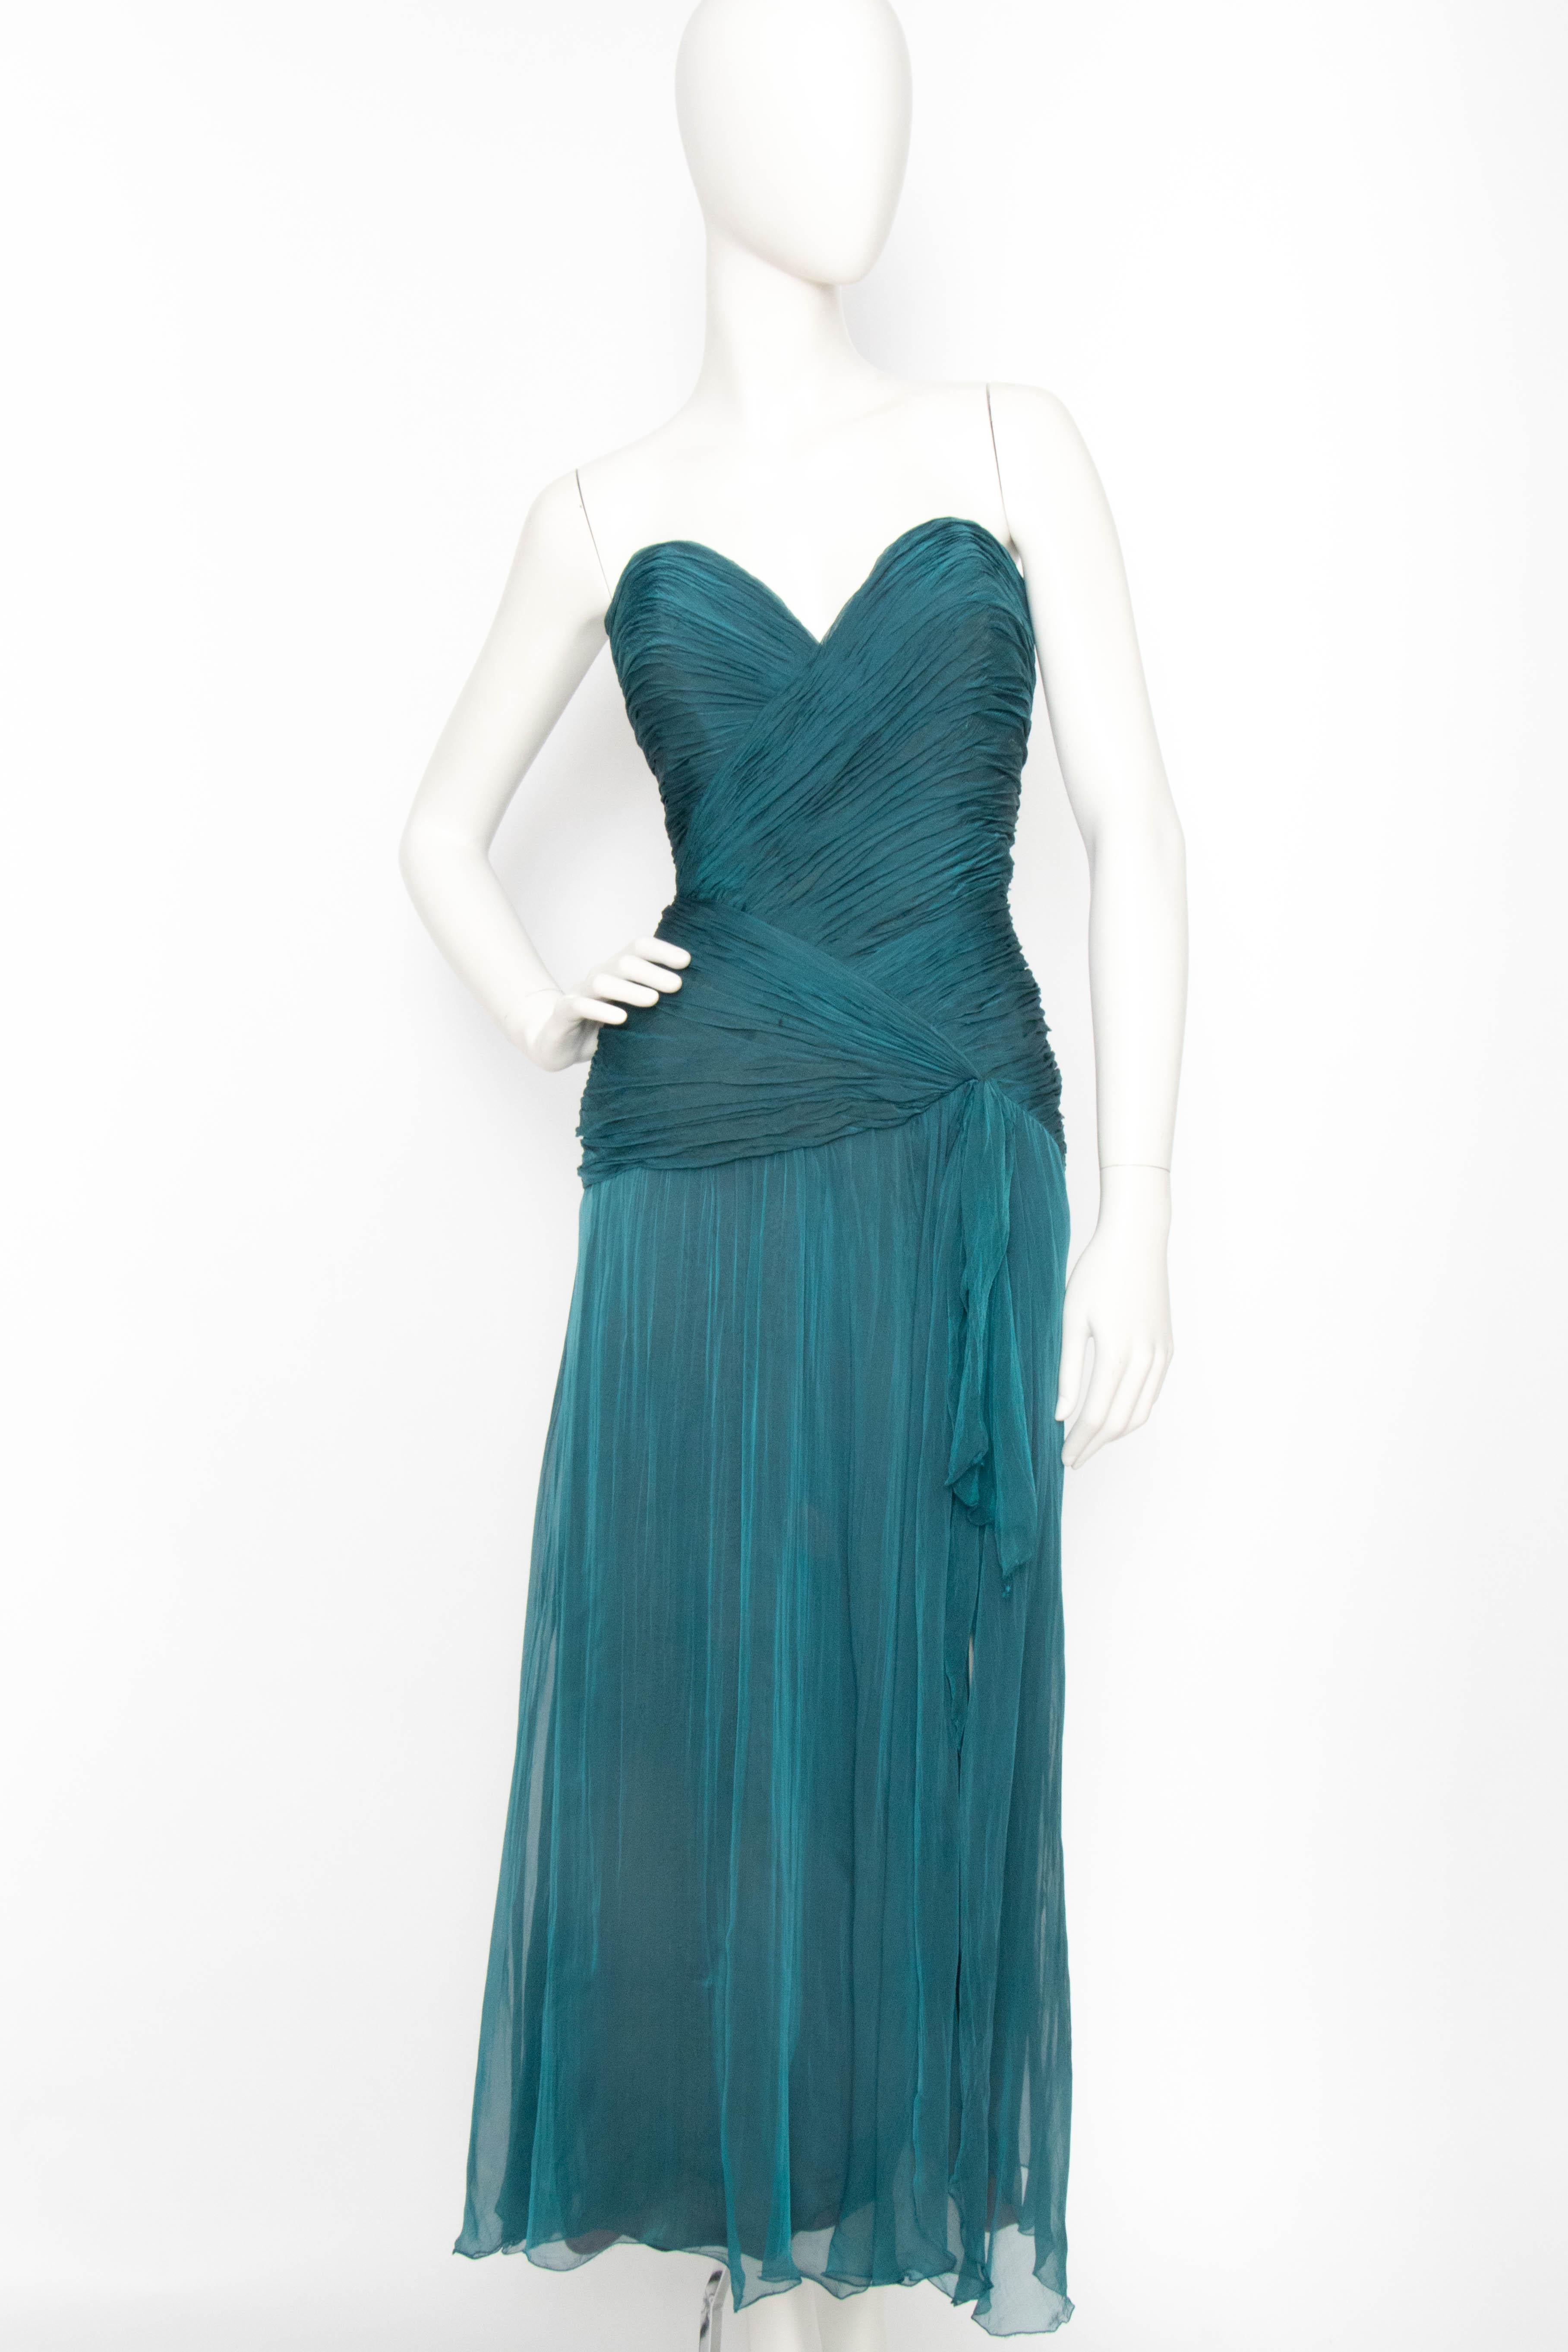 An incredible 1980s Azzaro blue silk chiffon dress with a sweetheart neckline, ruched bodice and semi-sheer skirt with a fabulous thigh gracing slit detail in front. The dress has a back zipper closure with a hook and eye fastening at the top, and a